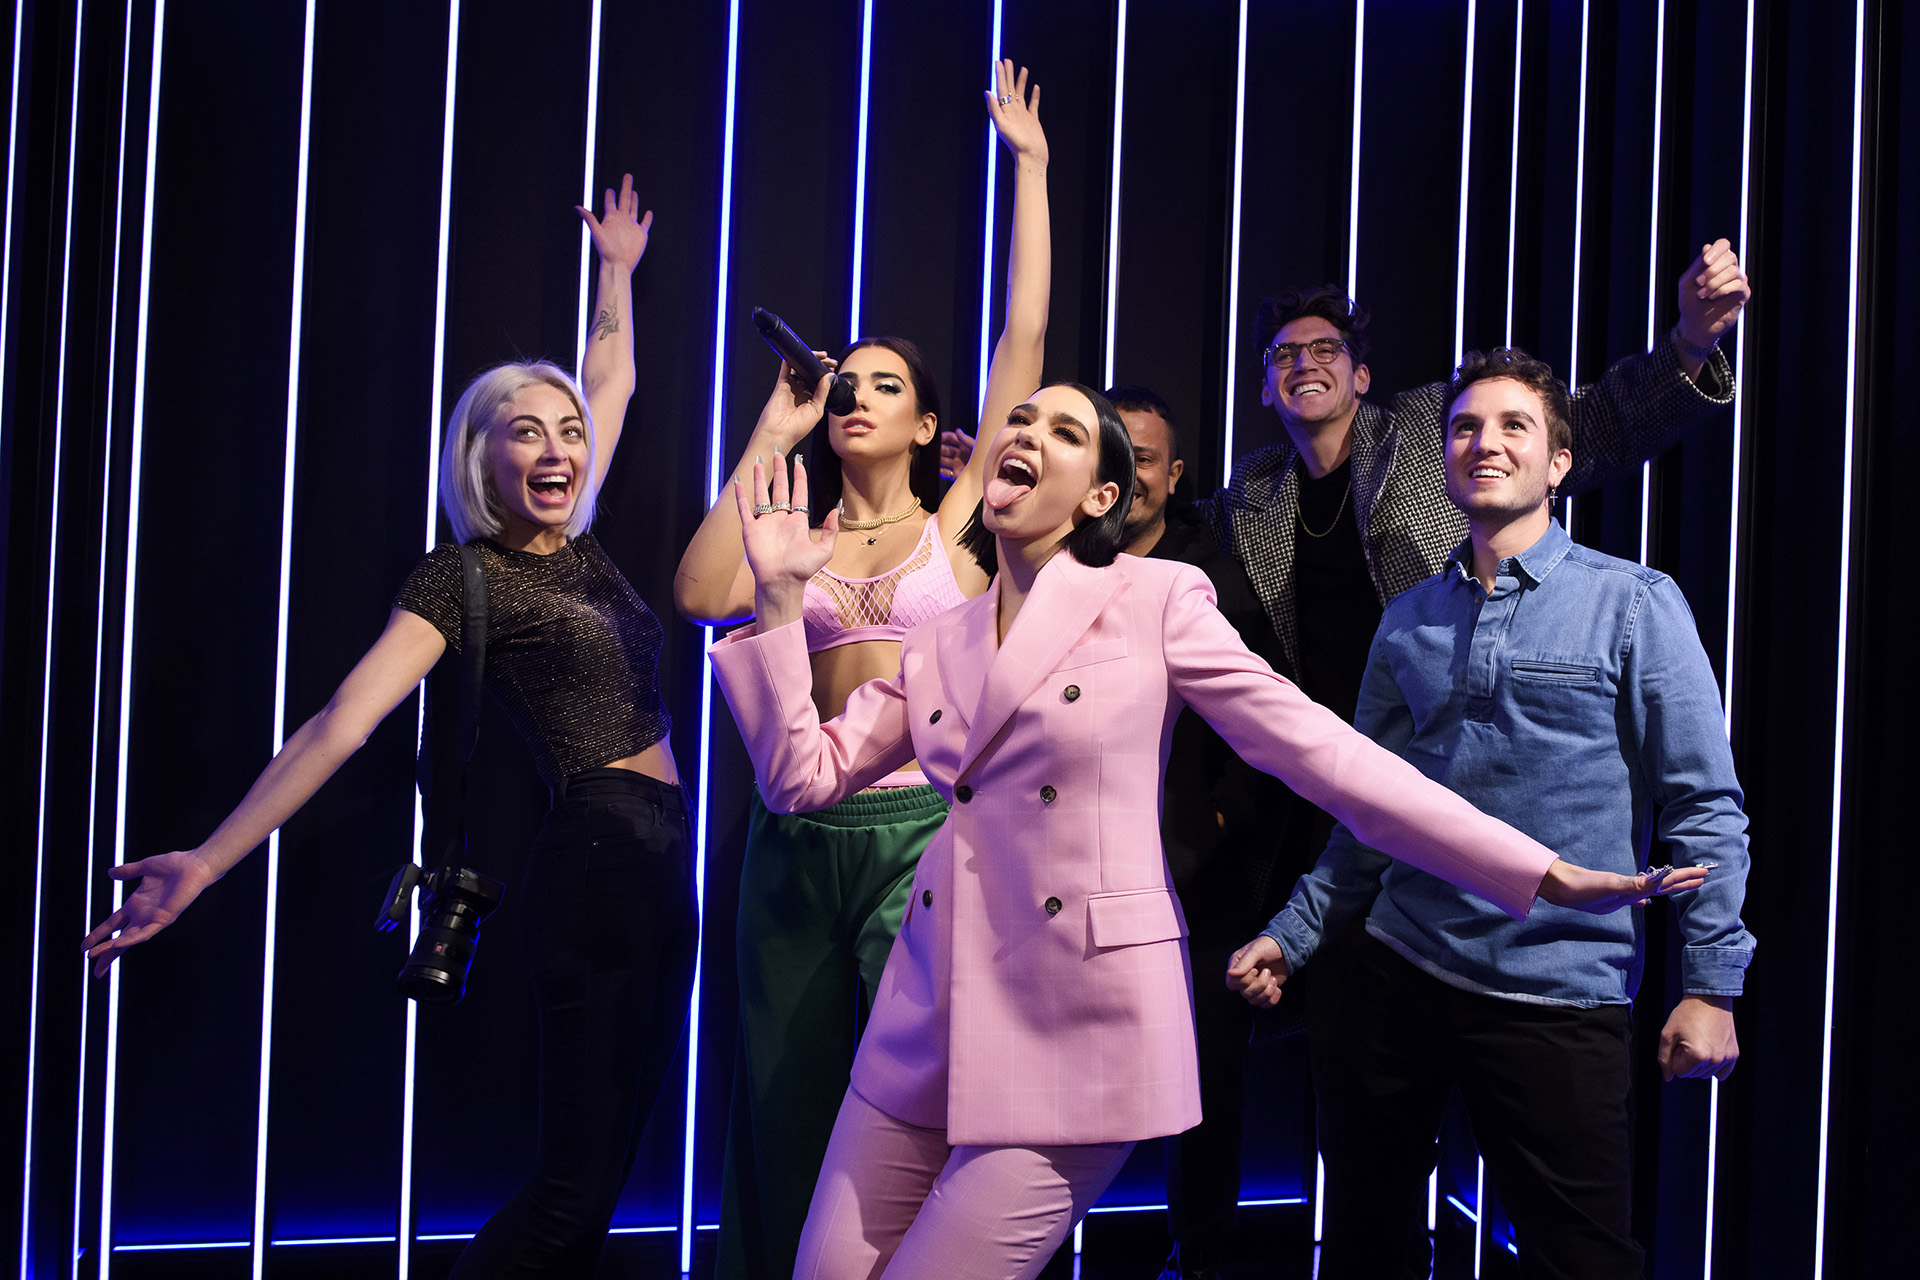 Dua Lipa with her figure and fans at Madame Tussauds